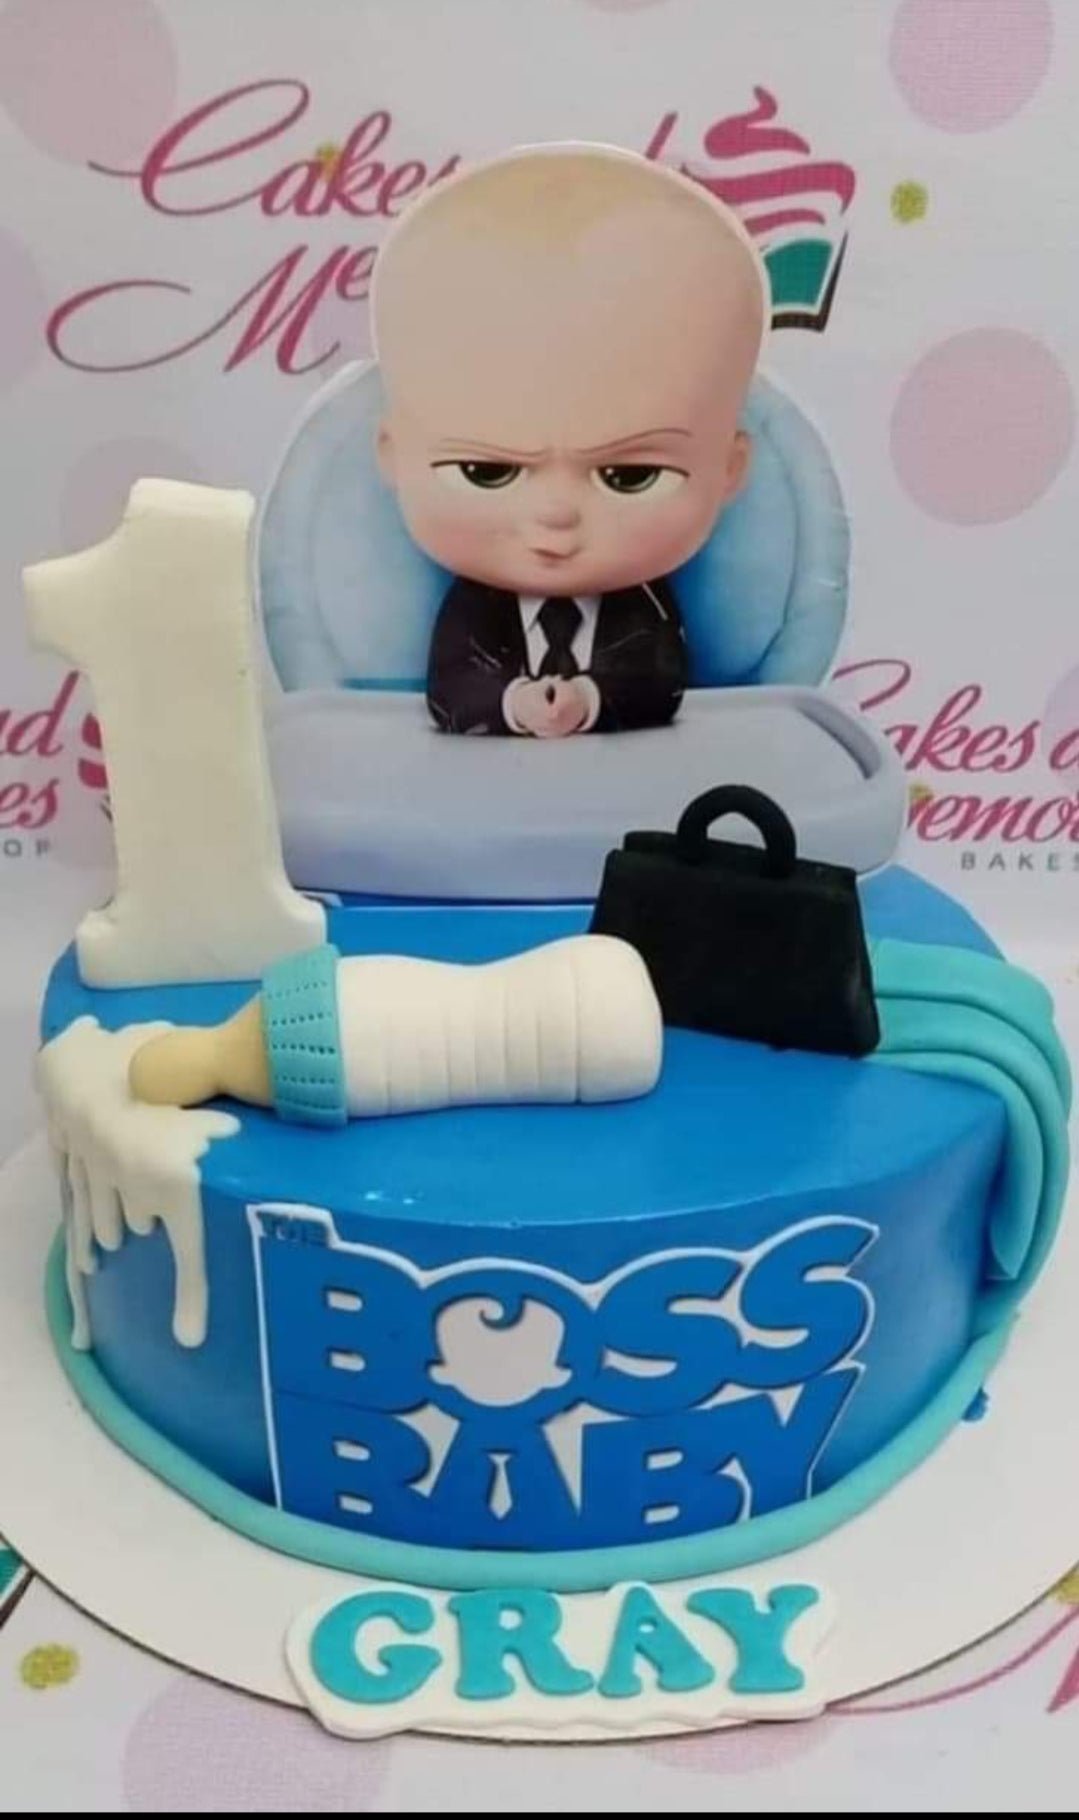 Zyozique 10 pcs Boss Baby Cupcake Toppers 1st Birthday Cake Decorations for Boss  Baby Themed 1st Birthday Party Decorations Baby Shower Supplies and favors Cupcake  Topper : Amazon.in: Toys & Games